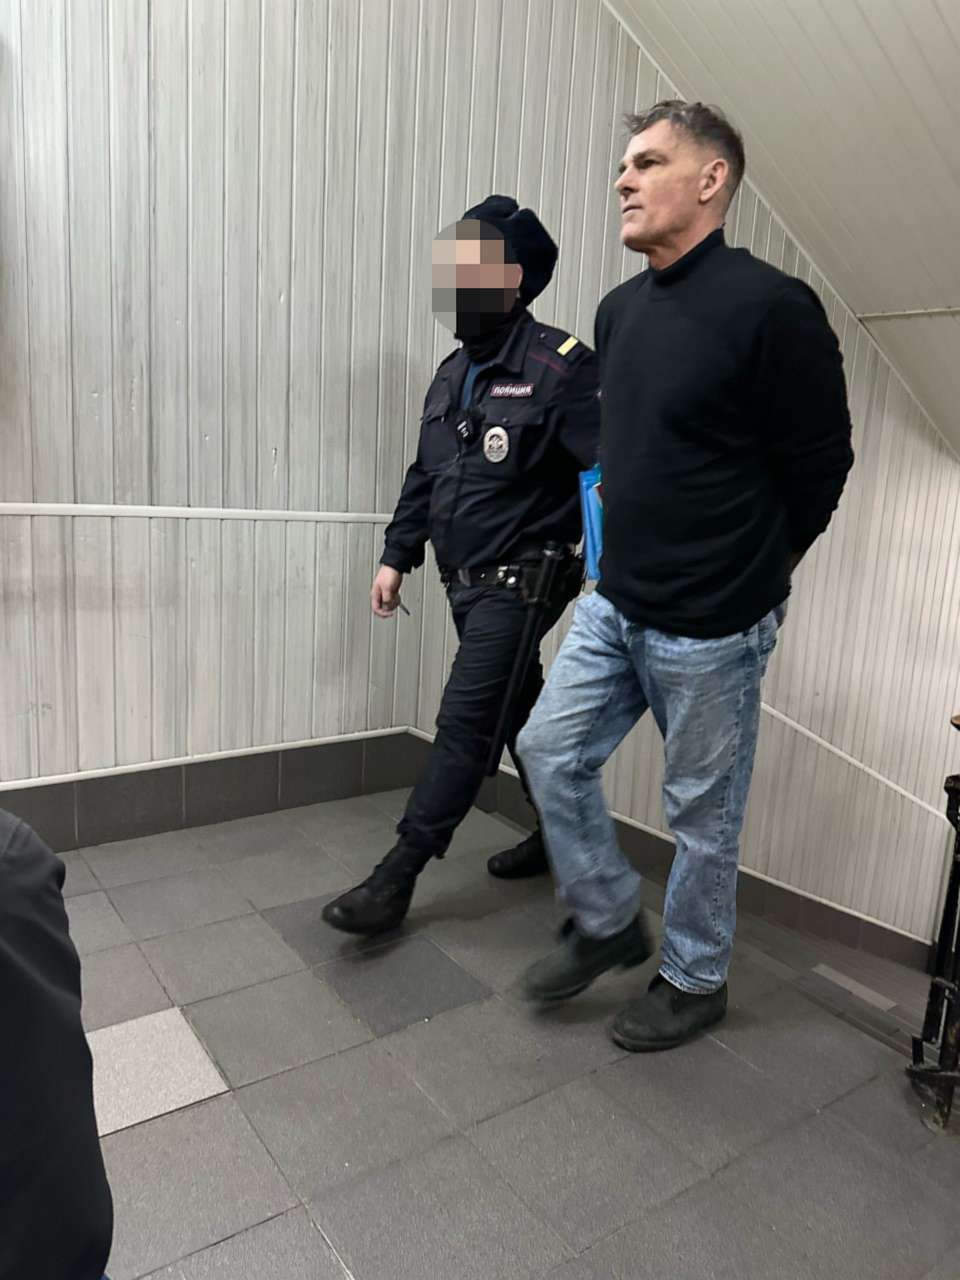 PHOTO: David Barnes, 65, of Texas is seen here walking into court in Moscow, Russia, on Jan. 19, 2023.